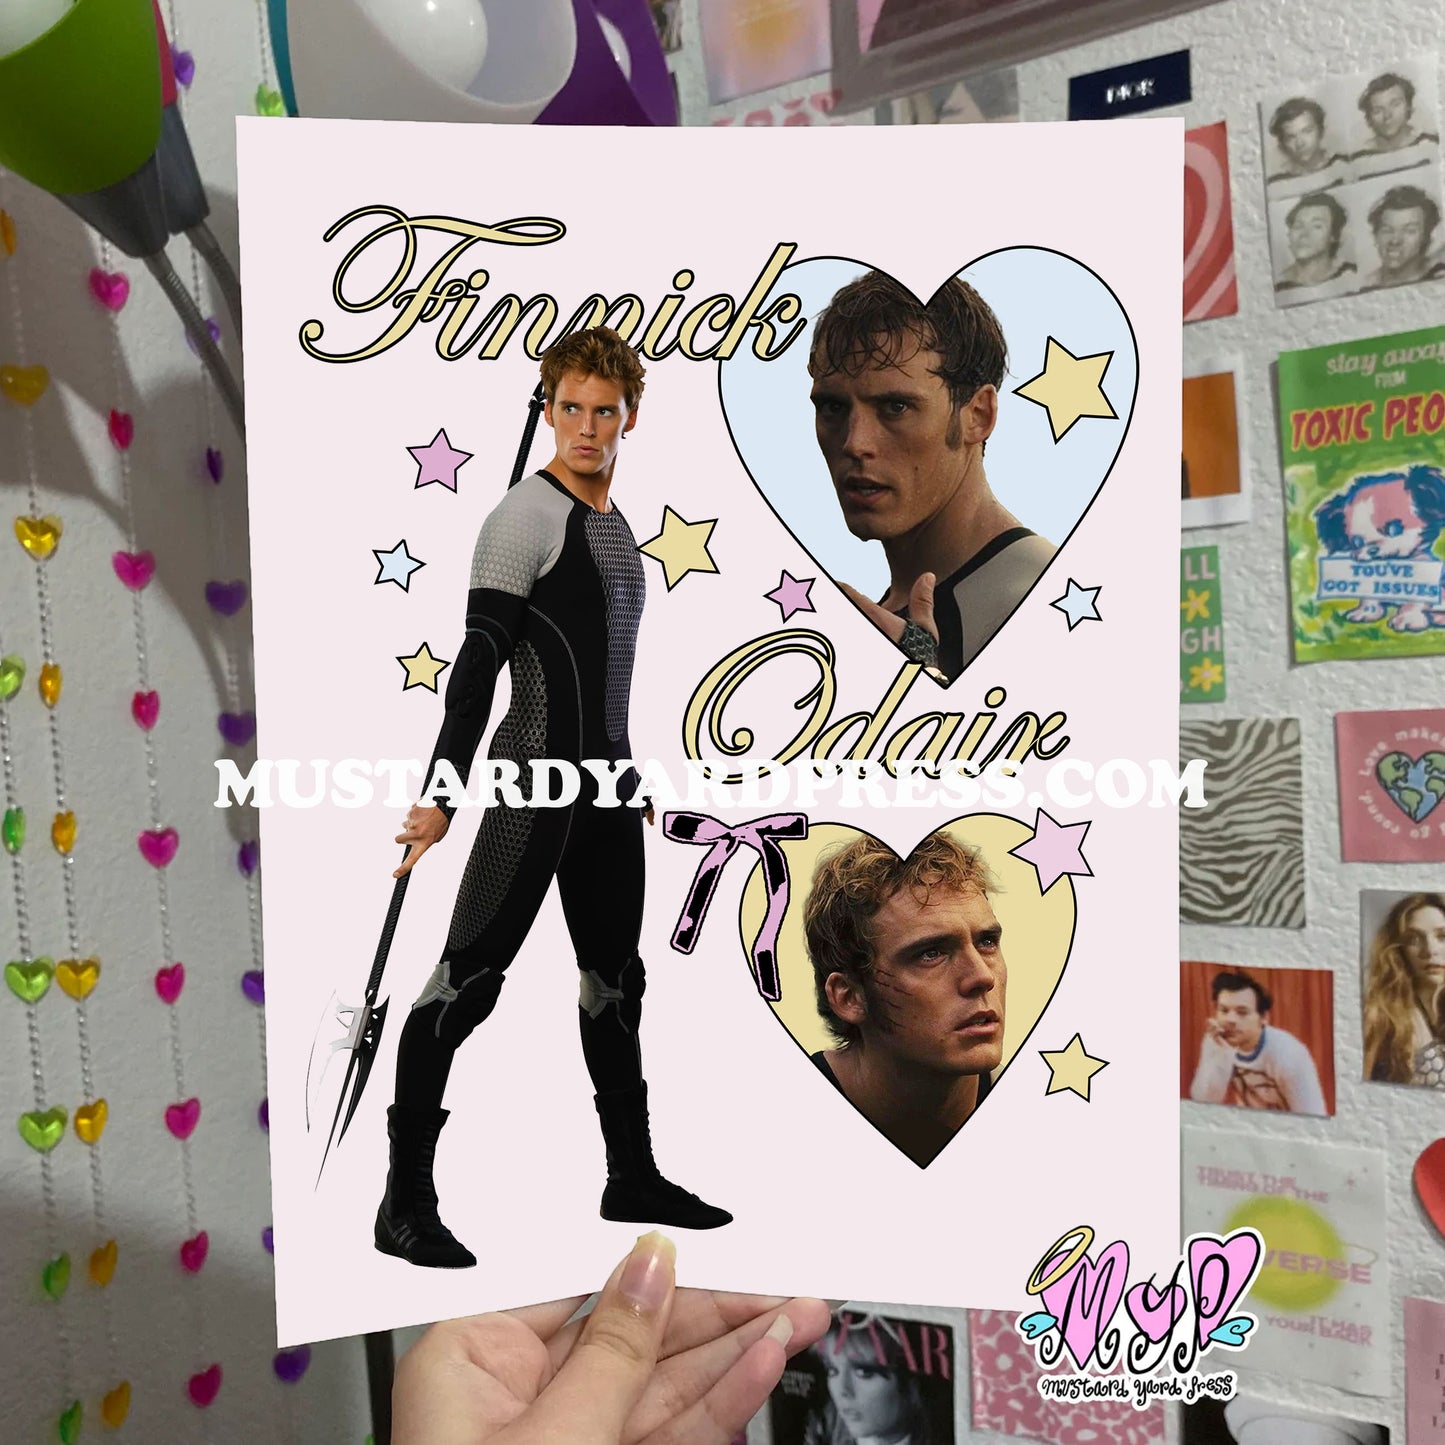 finnick hearts poster